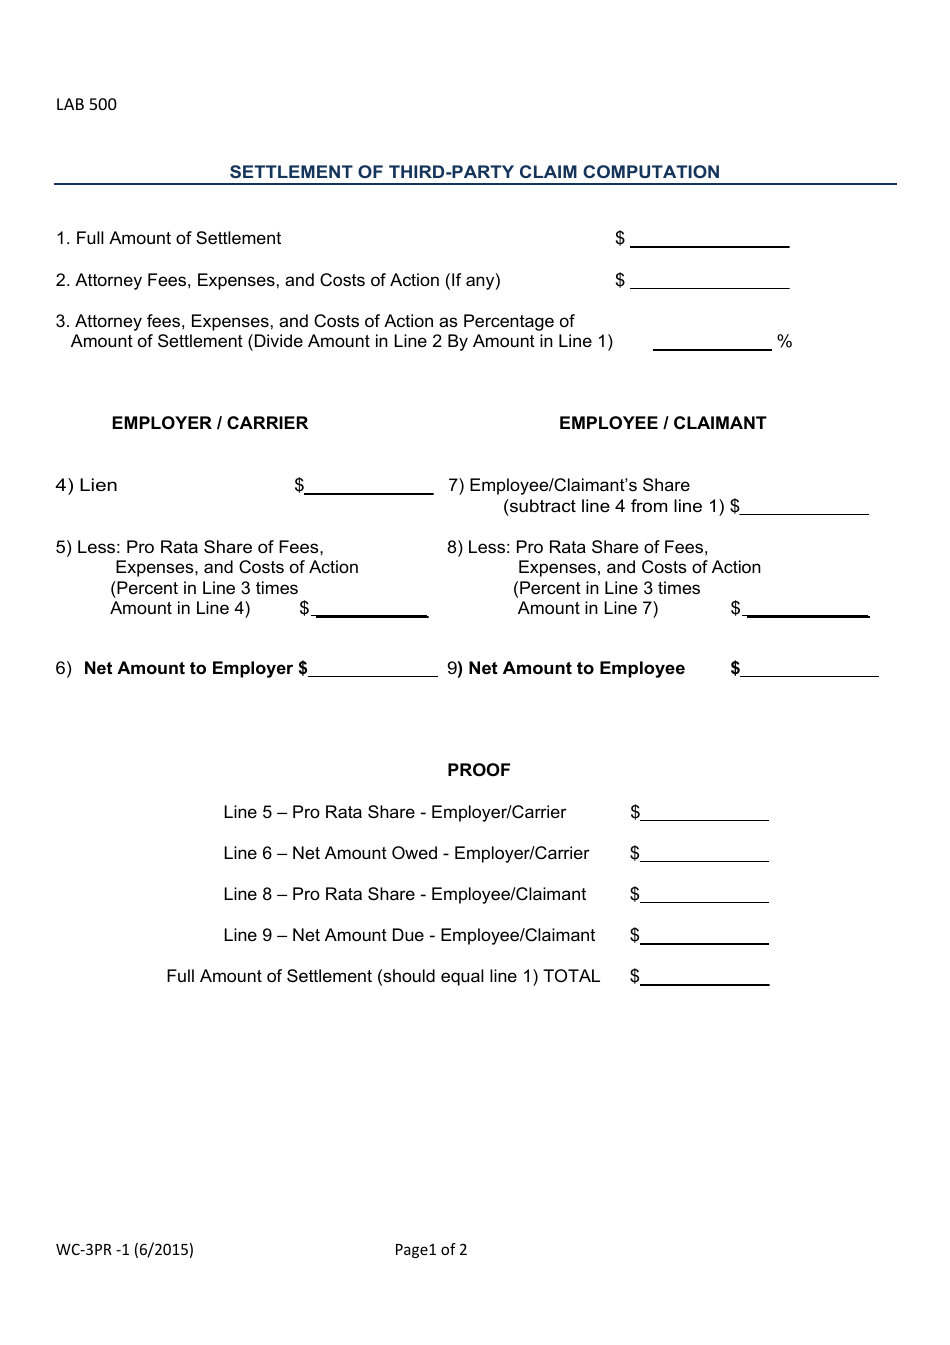 Form WC-3PR -1 Settlement of Third-Party Claim Computation - New Hampshire, Page 1